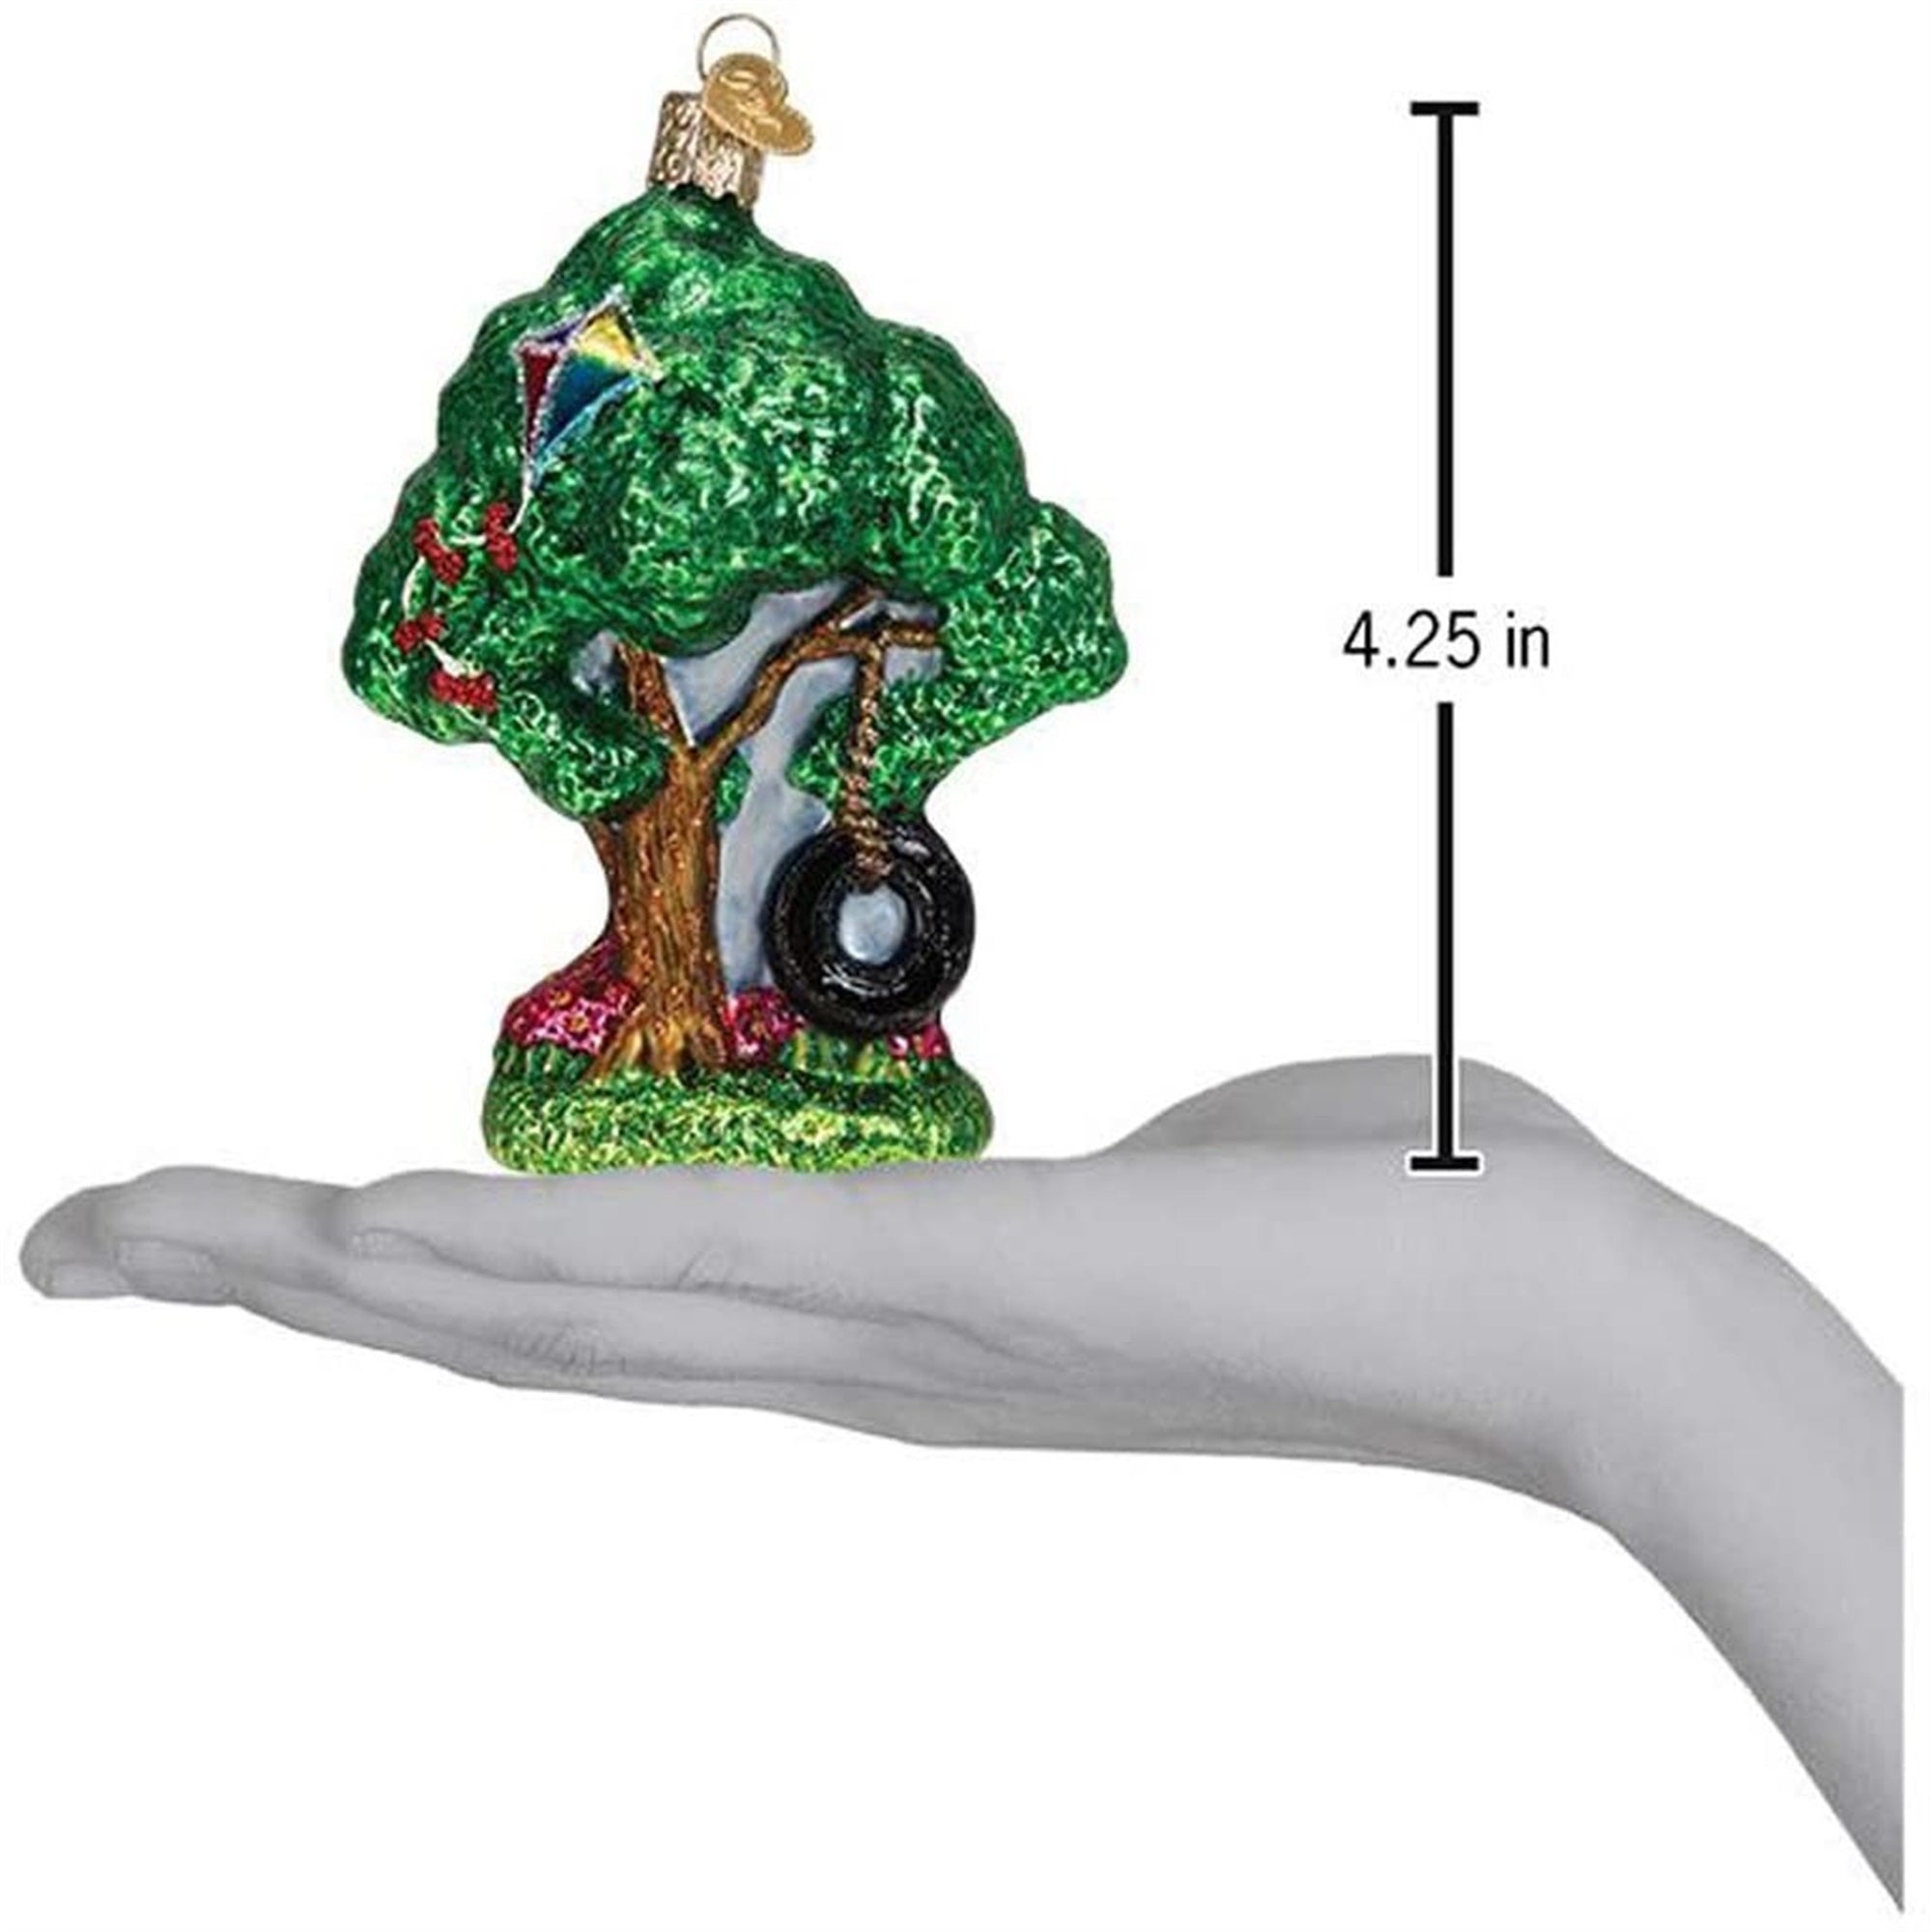 Old World Christmas Blown Glass Christmas Ornament, Tire Swing